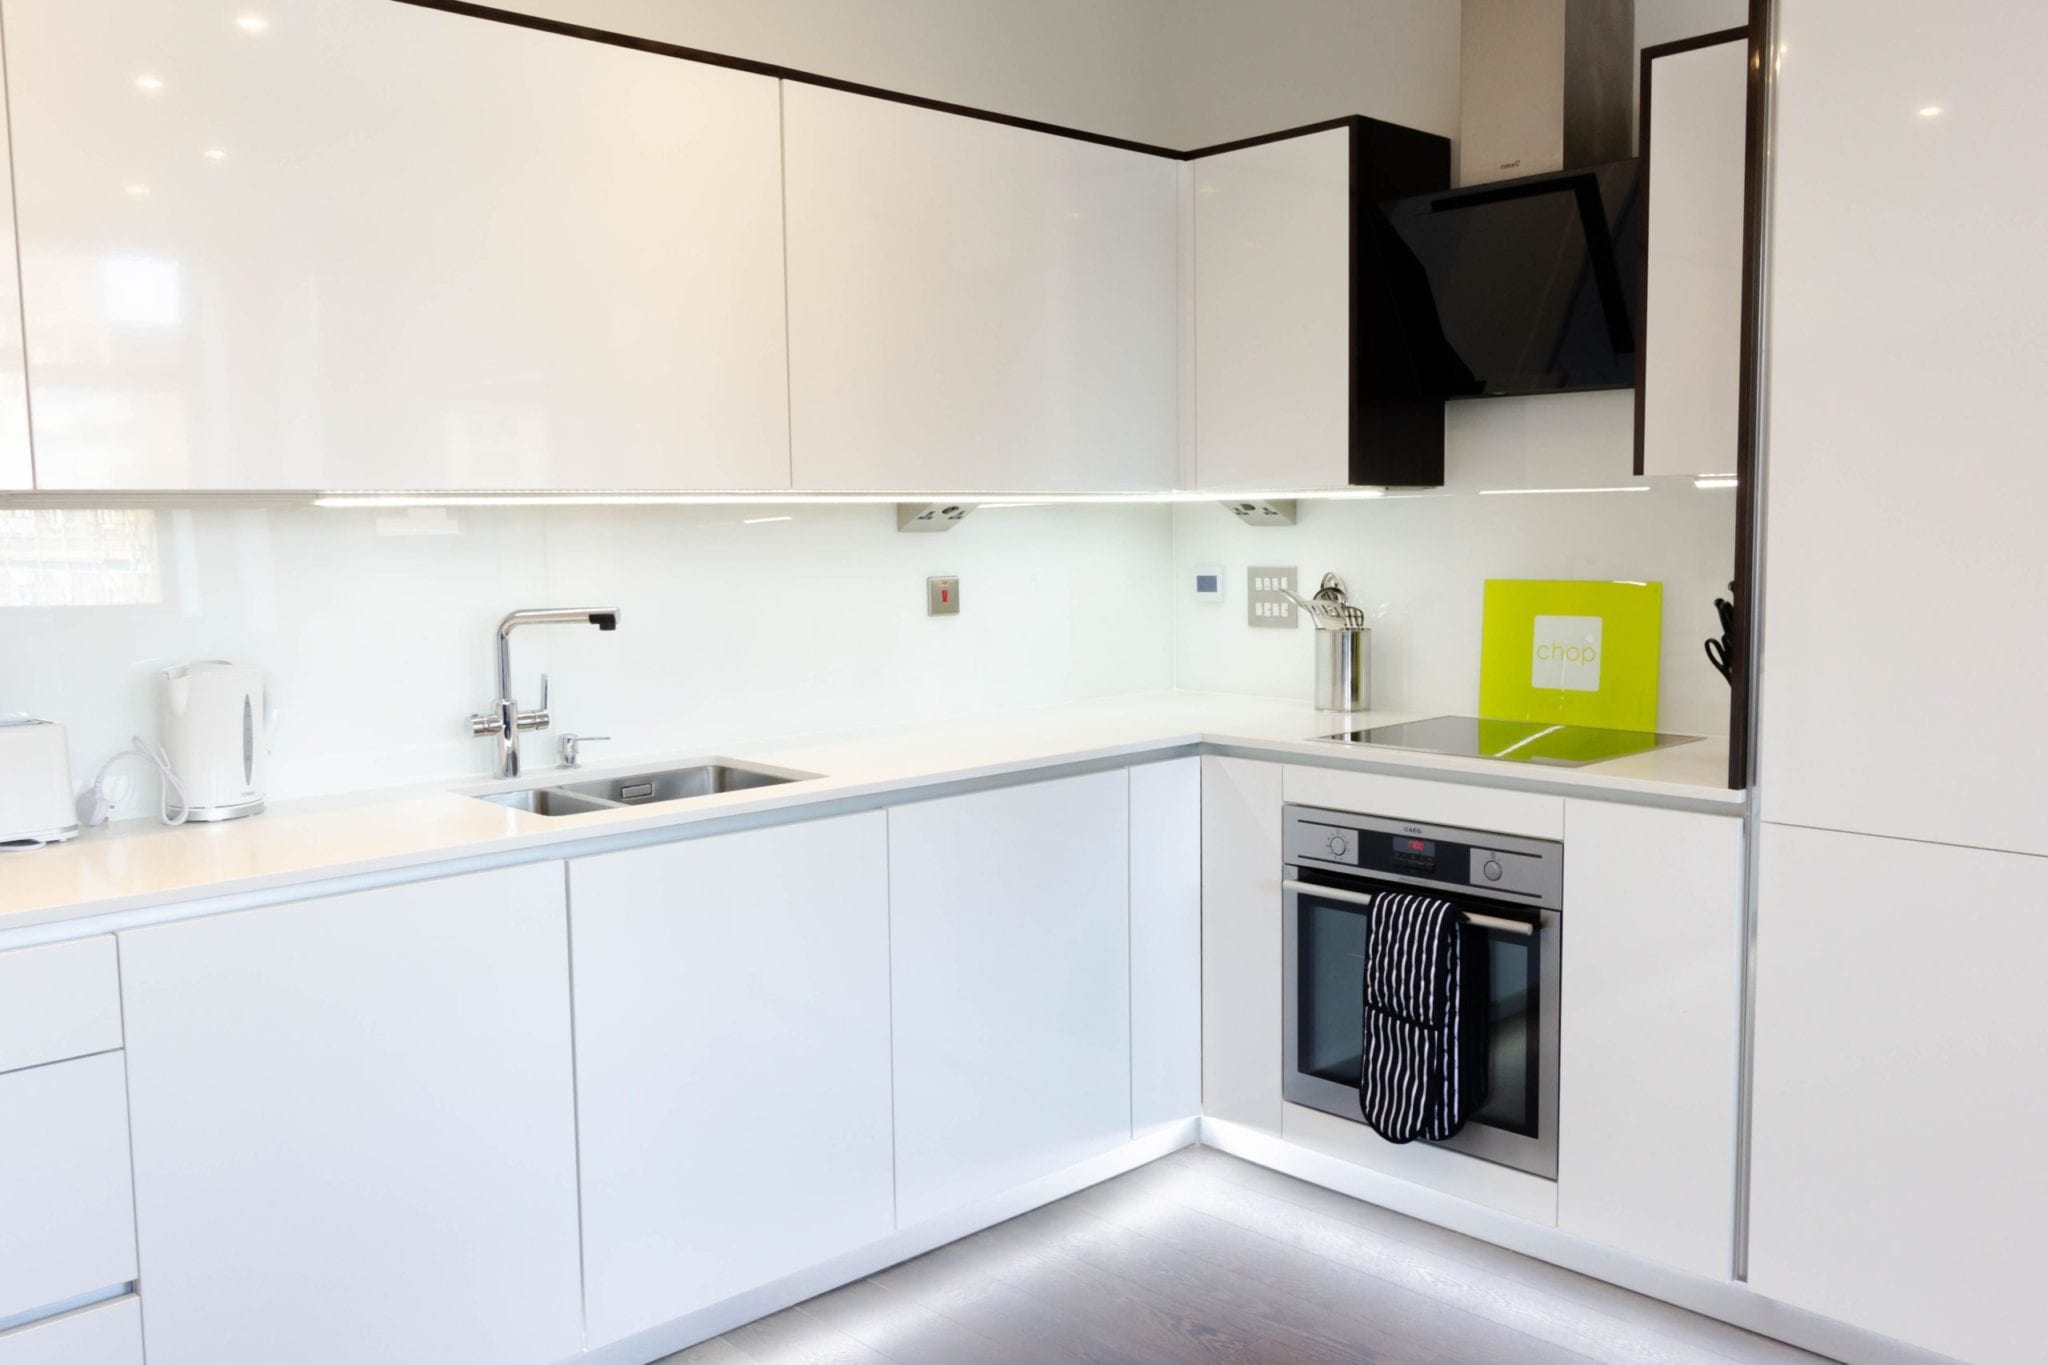 Student Accommodation in Aldgate (central London)